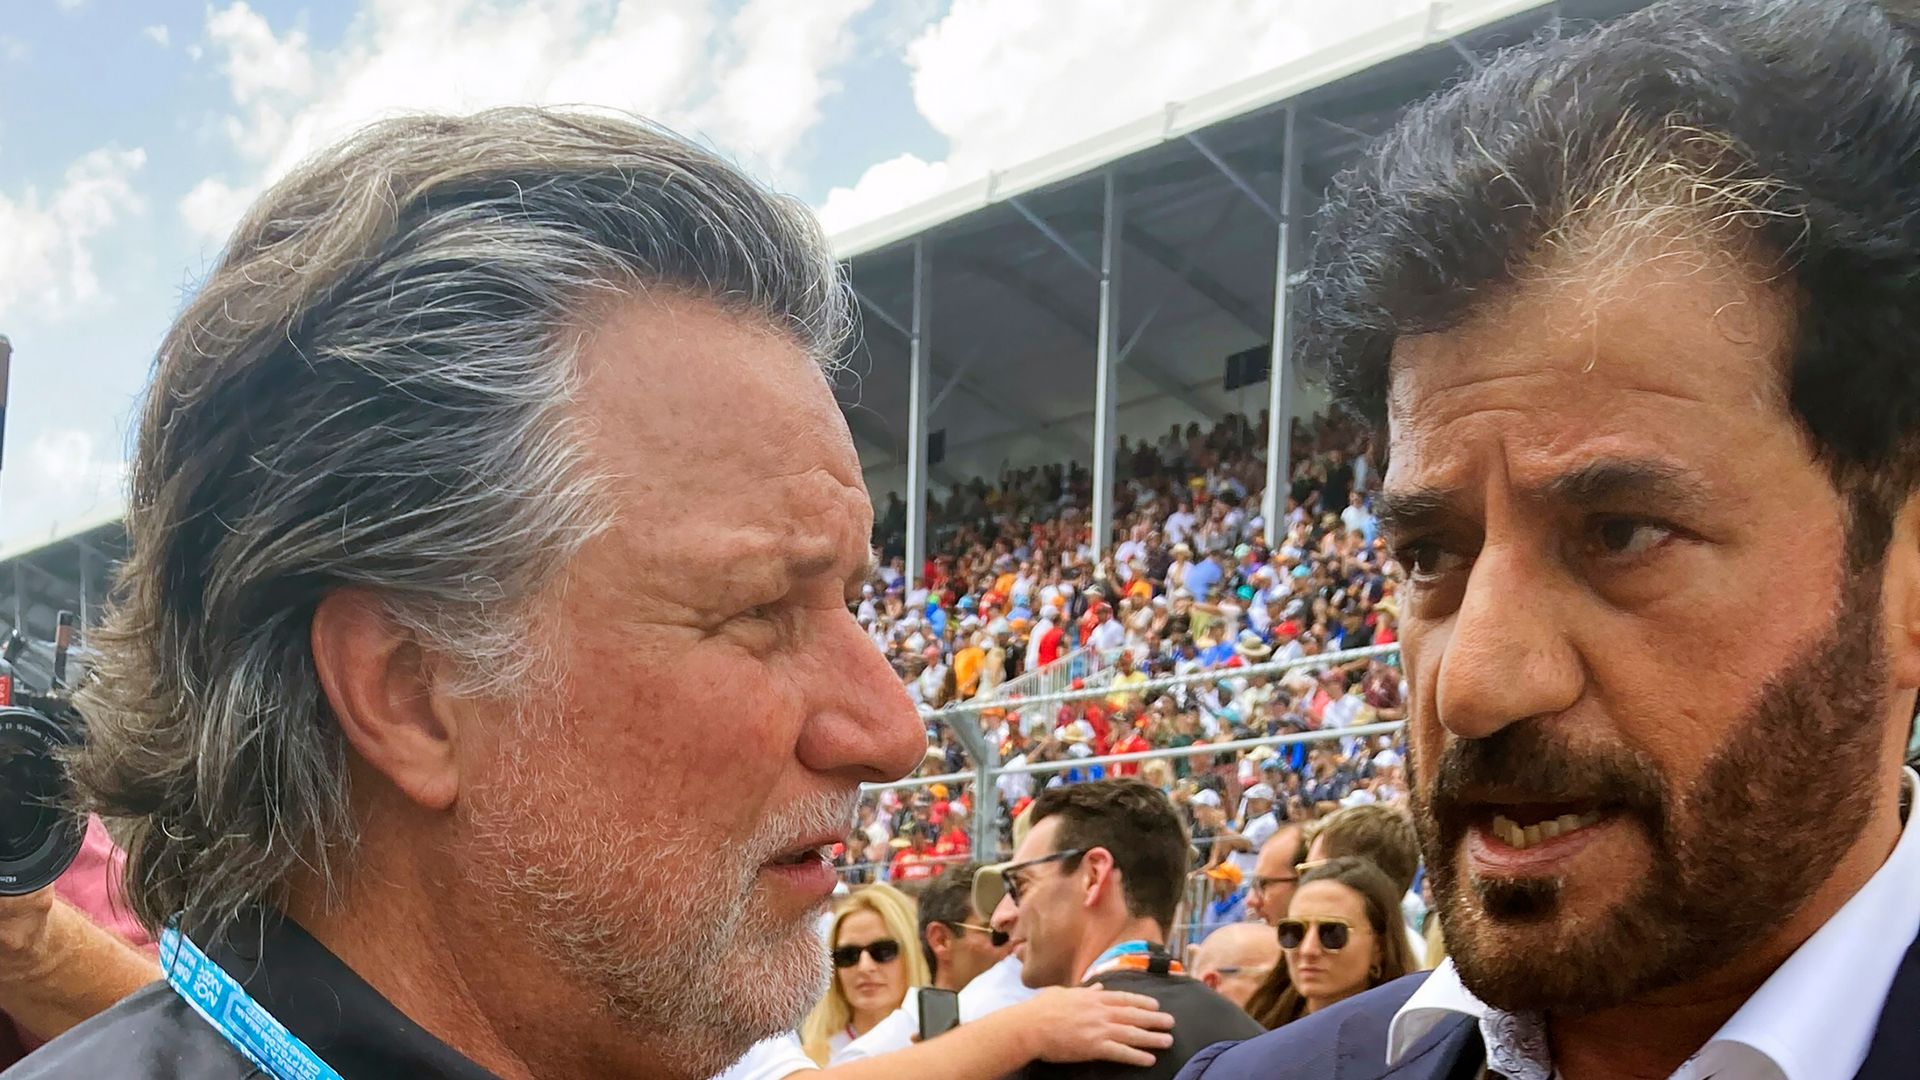 Andretti unpacked: What's going on and what happens next?